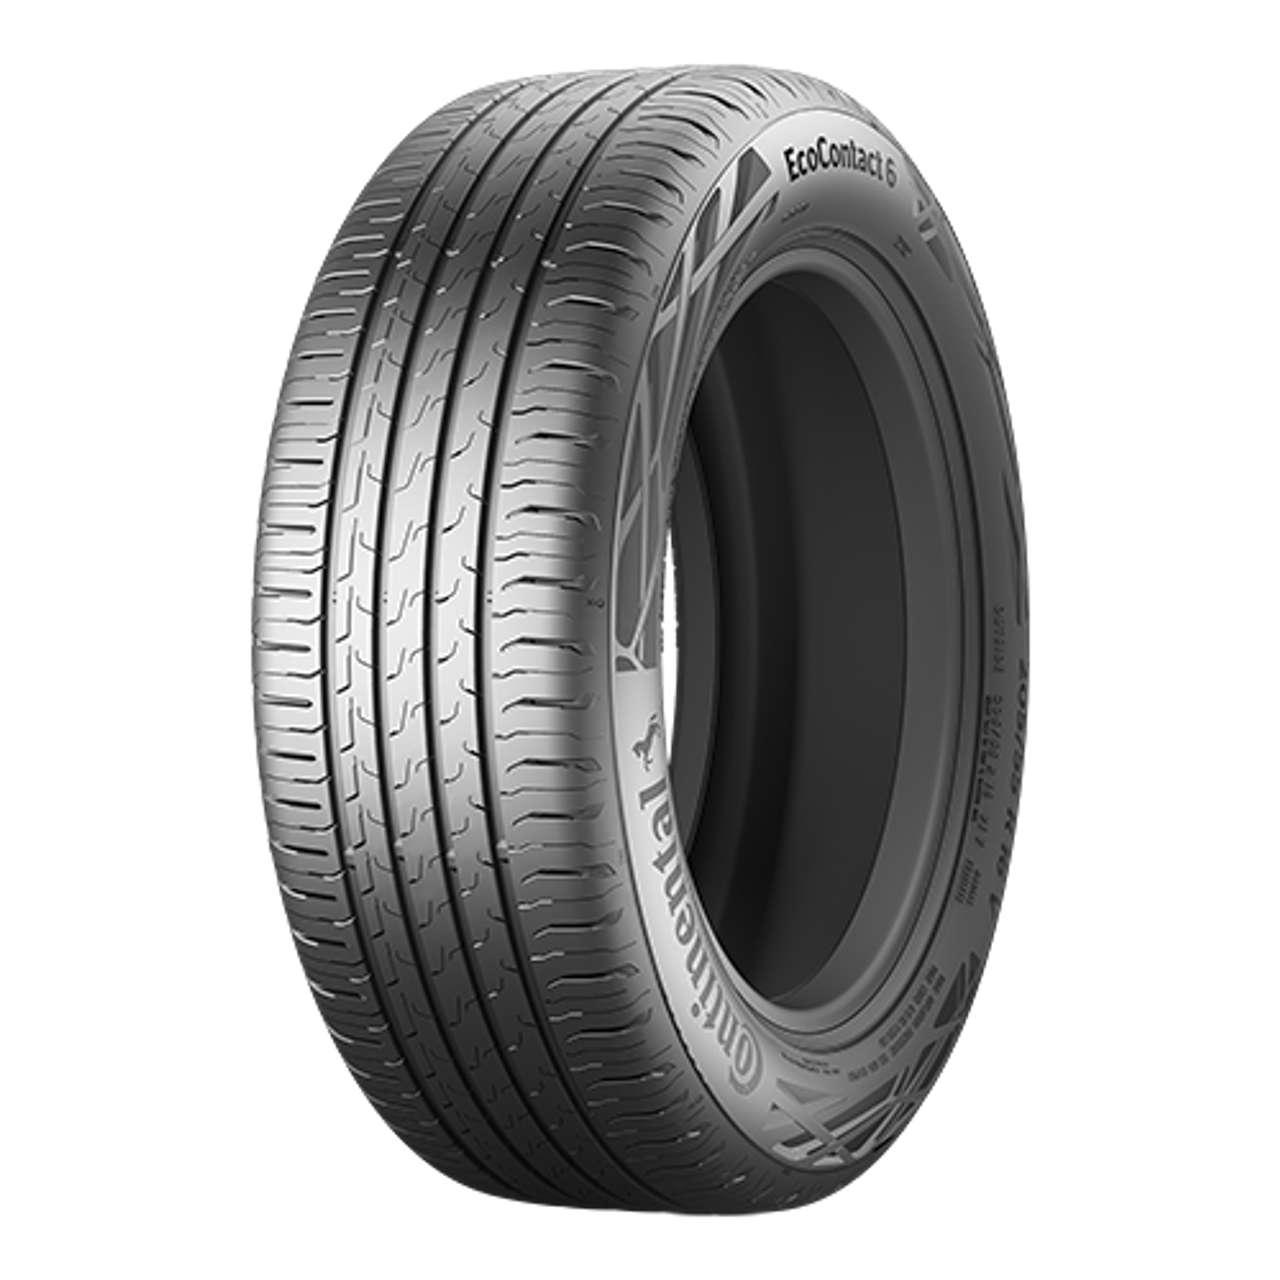 CONTINENTAL ECOCONTACT 6 (EVc) 235/55R18 100V CRM (CONTIRE.TEX) BSW